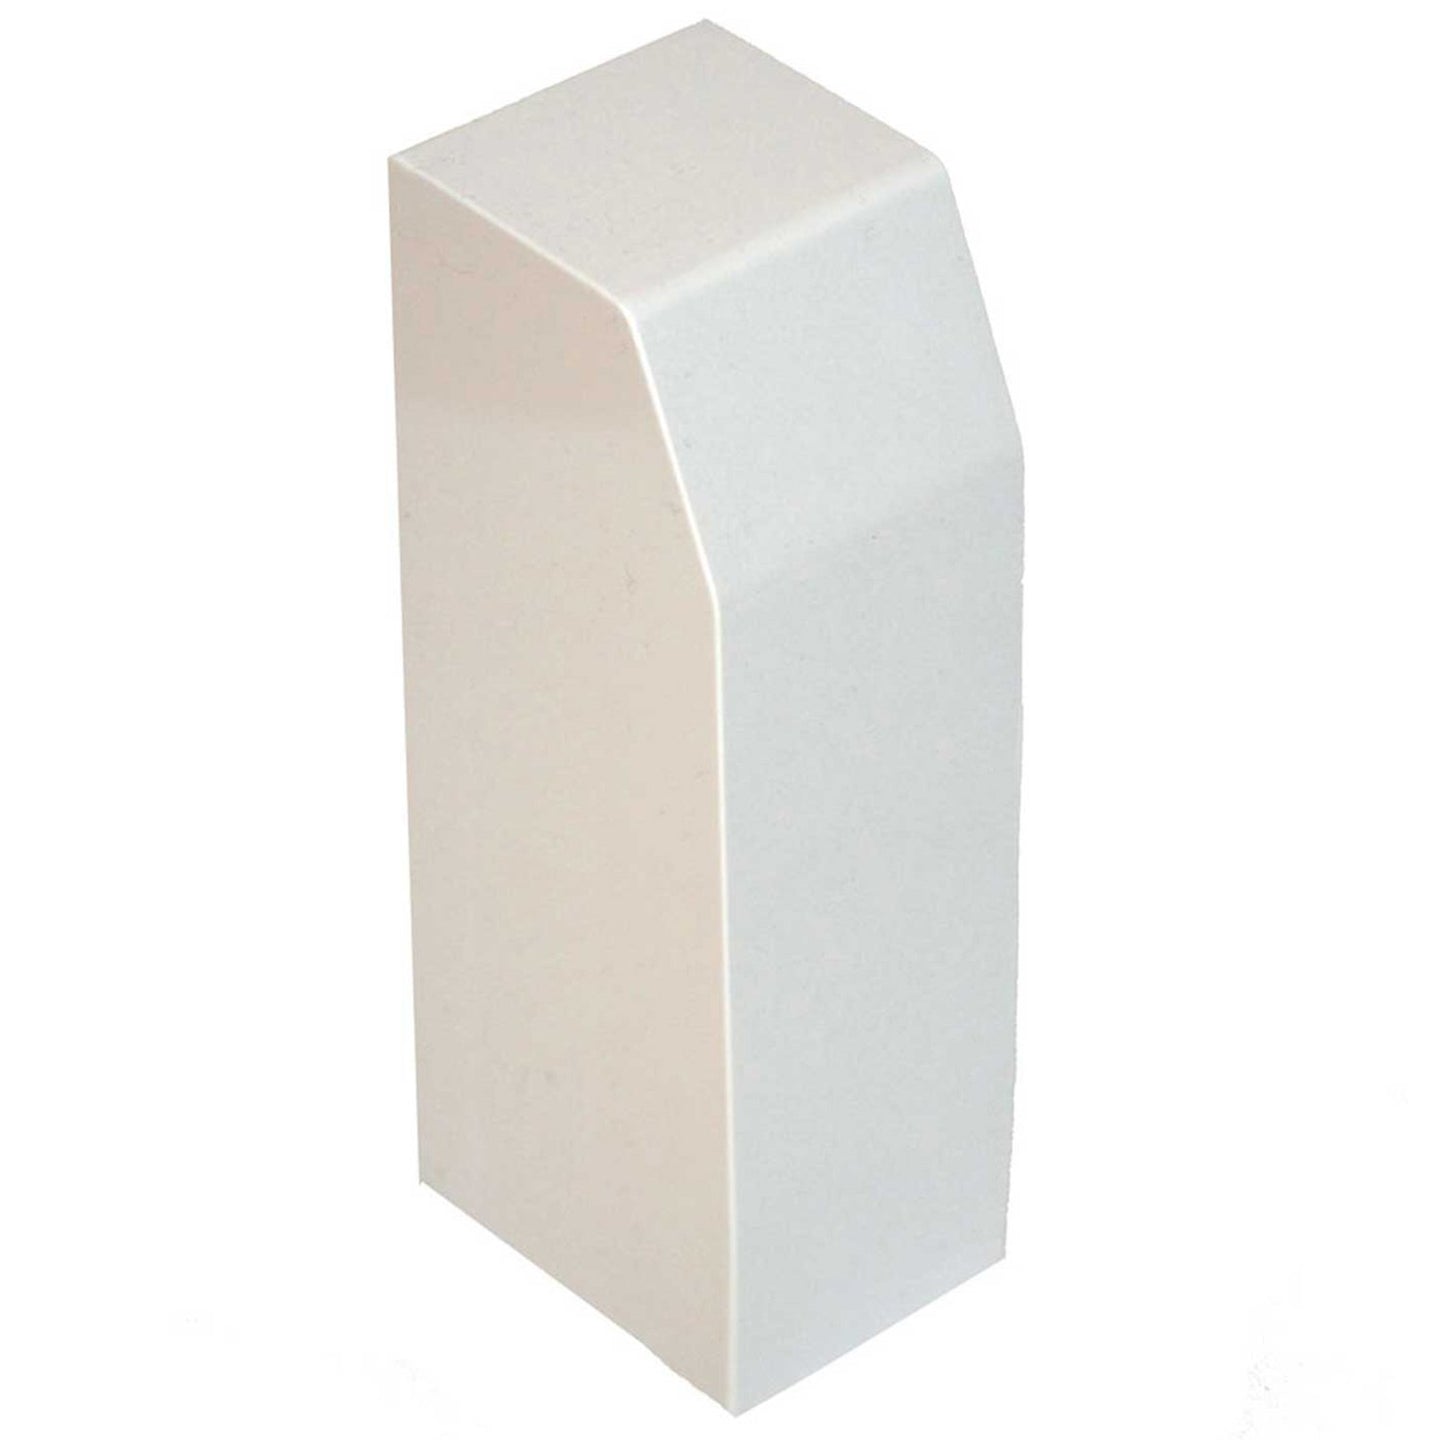 NeatHeat TALL Left End Cap Baseboard Heat Cover (refer to measuring guide prior to purchase)